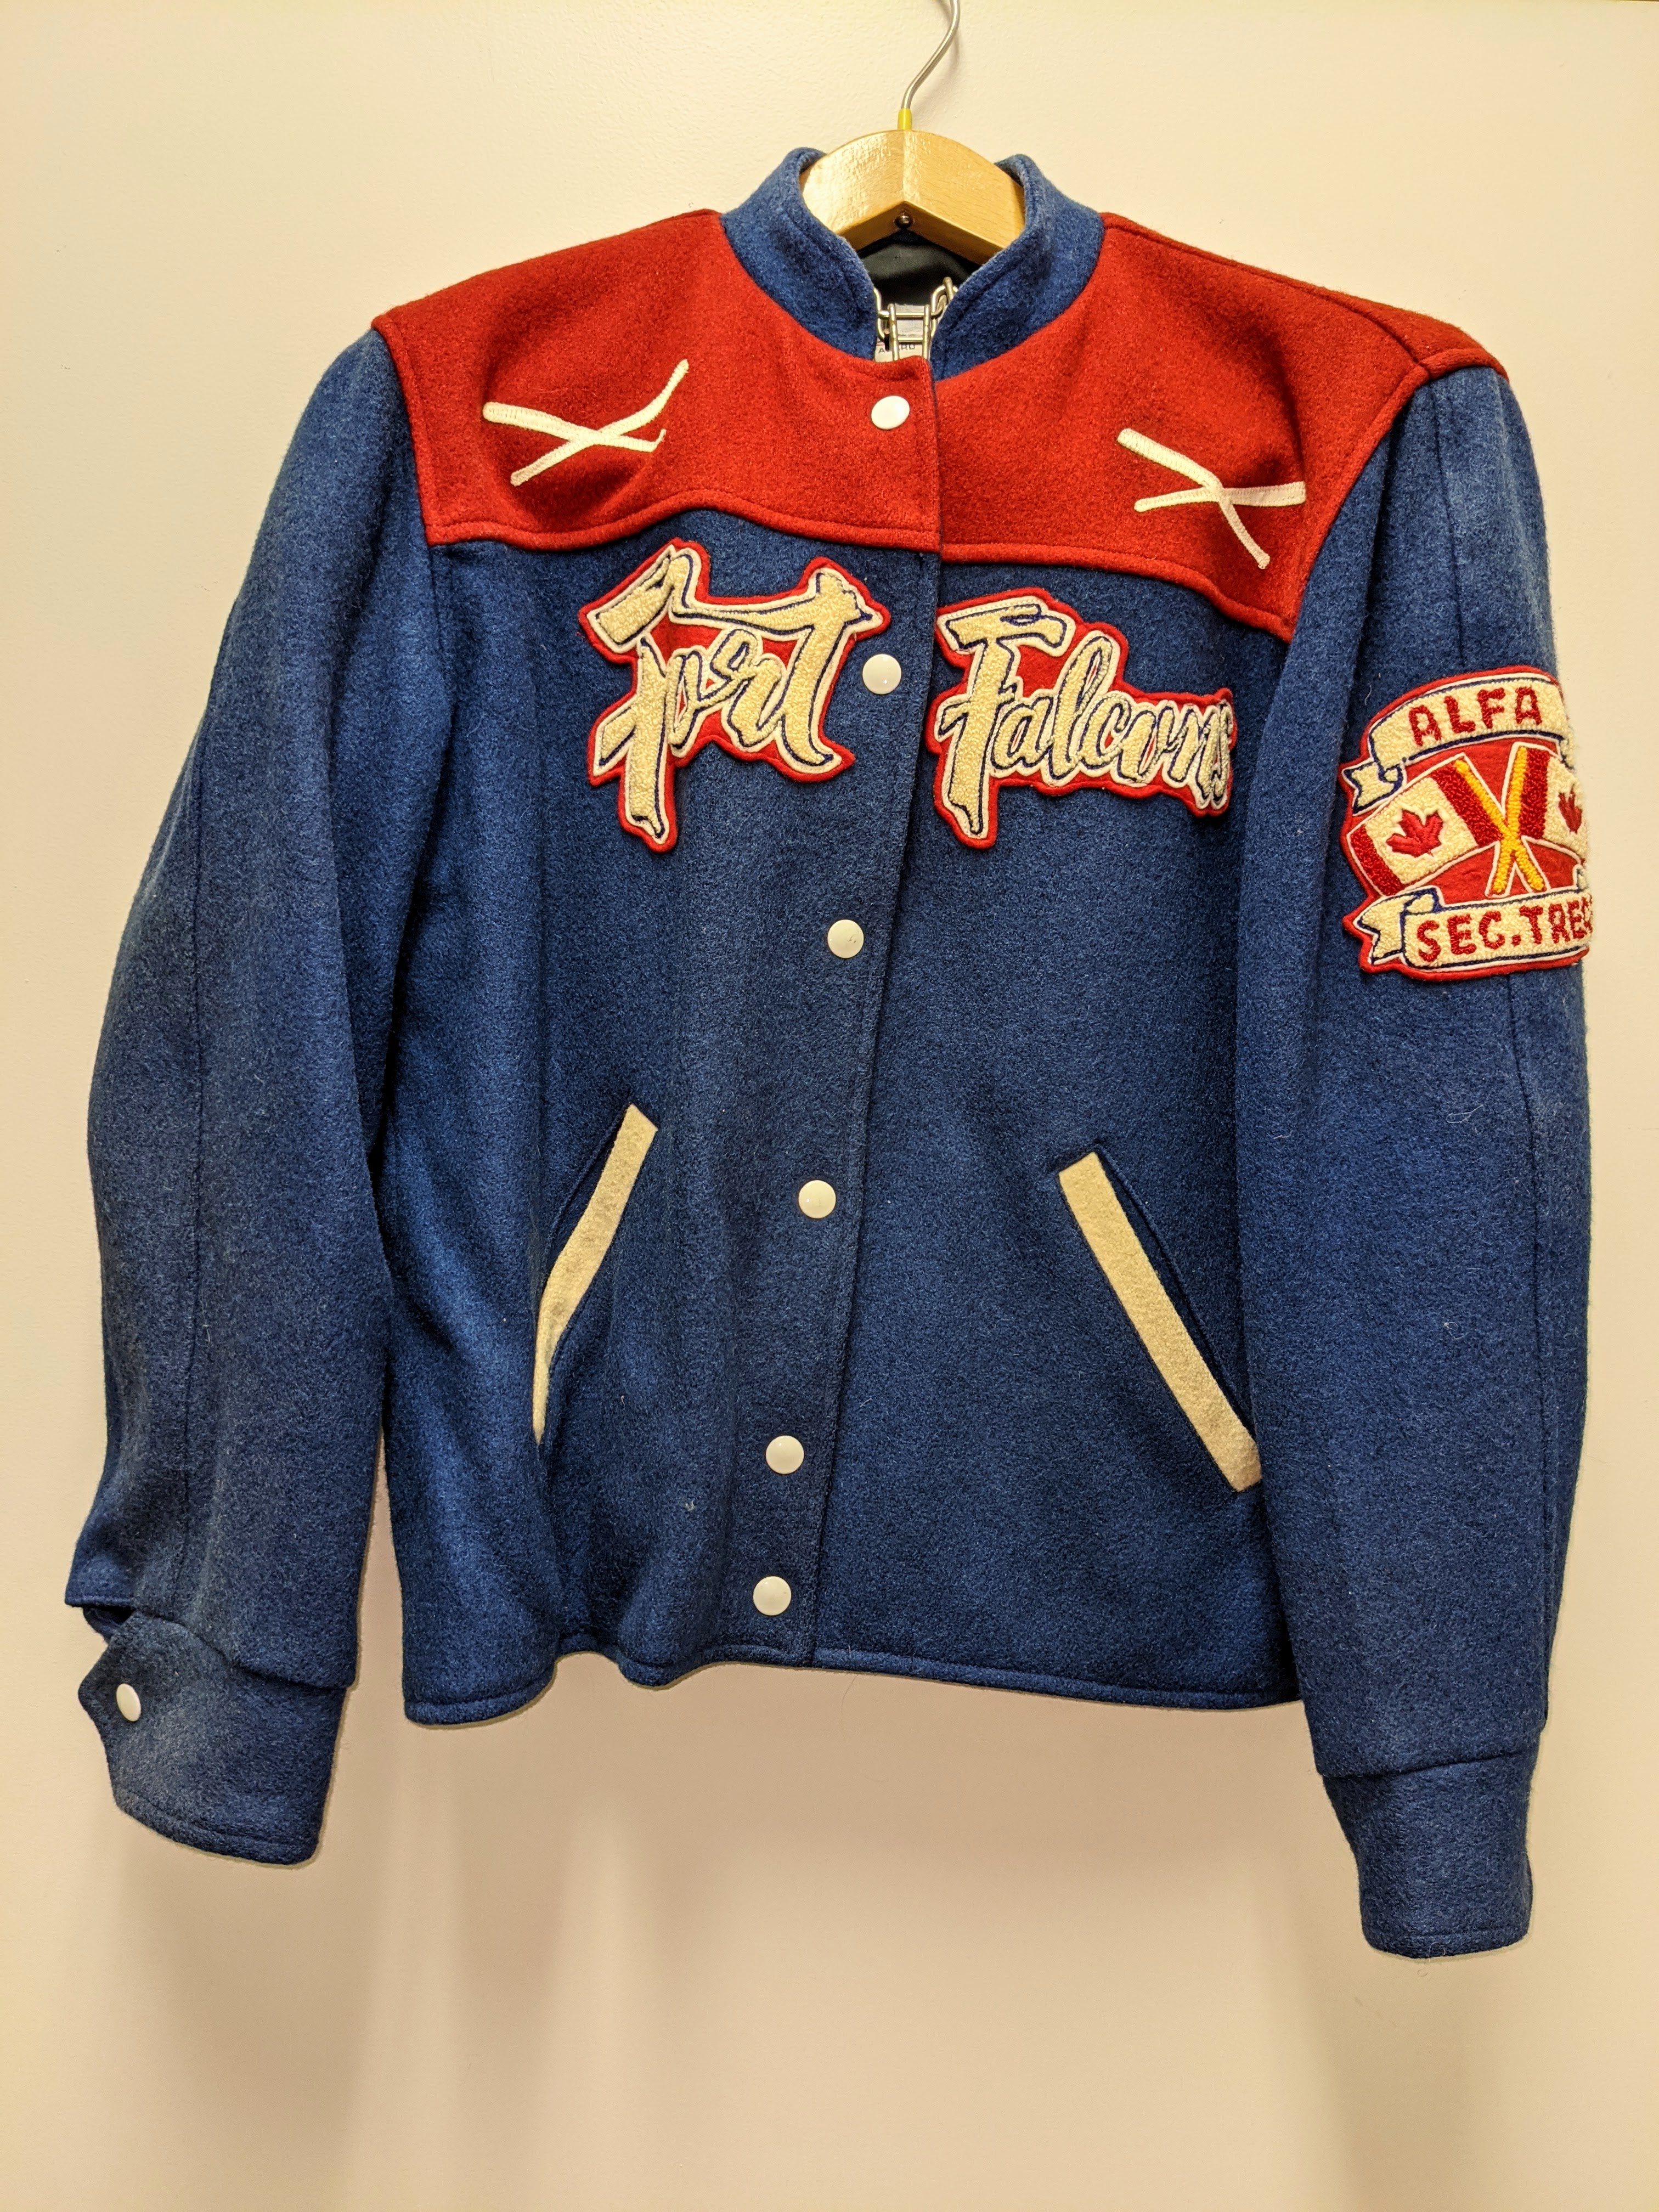 A 1968 bomber jacket of the "Fort Falcons" Baseball team is our artifact of the week! This jacket was owned by Alfa Twidale -as notated in the crest on the left sleeve. Alfa was the Secretary / Treasurer of the team in 1968. Competitive baseball has been enjoyed by Fort Vermilionaires for over a century. The earliest teams made up of neighbours from each locale  (Stony Point, Buttertown, Fort Vermilion) and played on grassy meadows!

30/08/2021
2004.03.138 / Twidale, John + Alfa